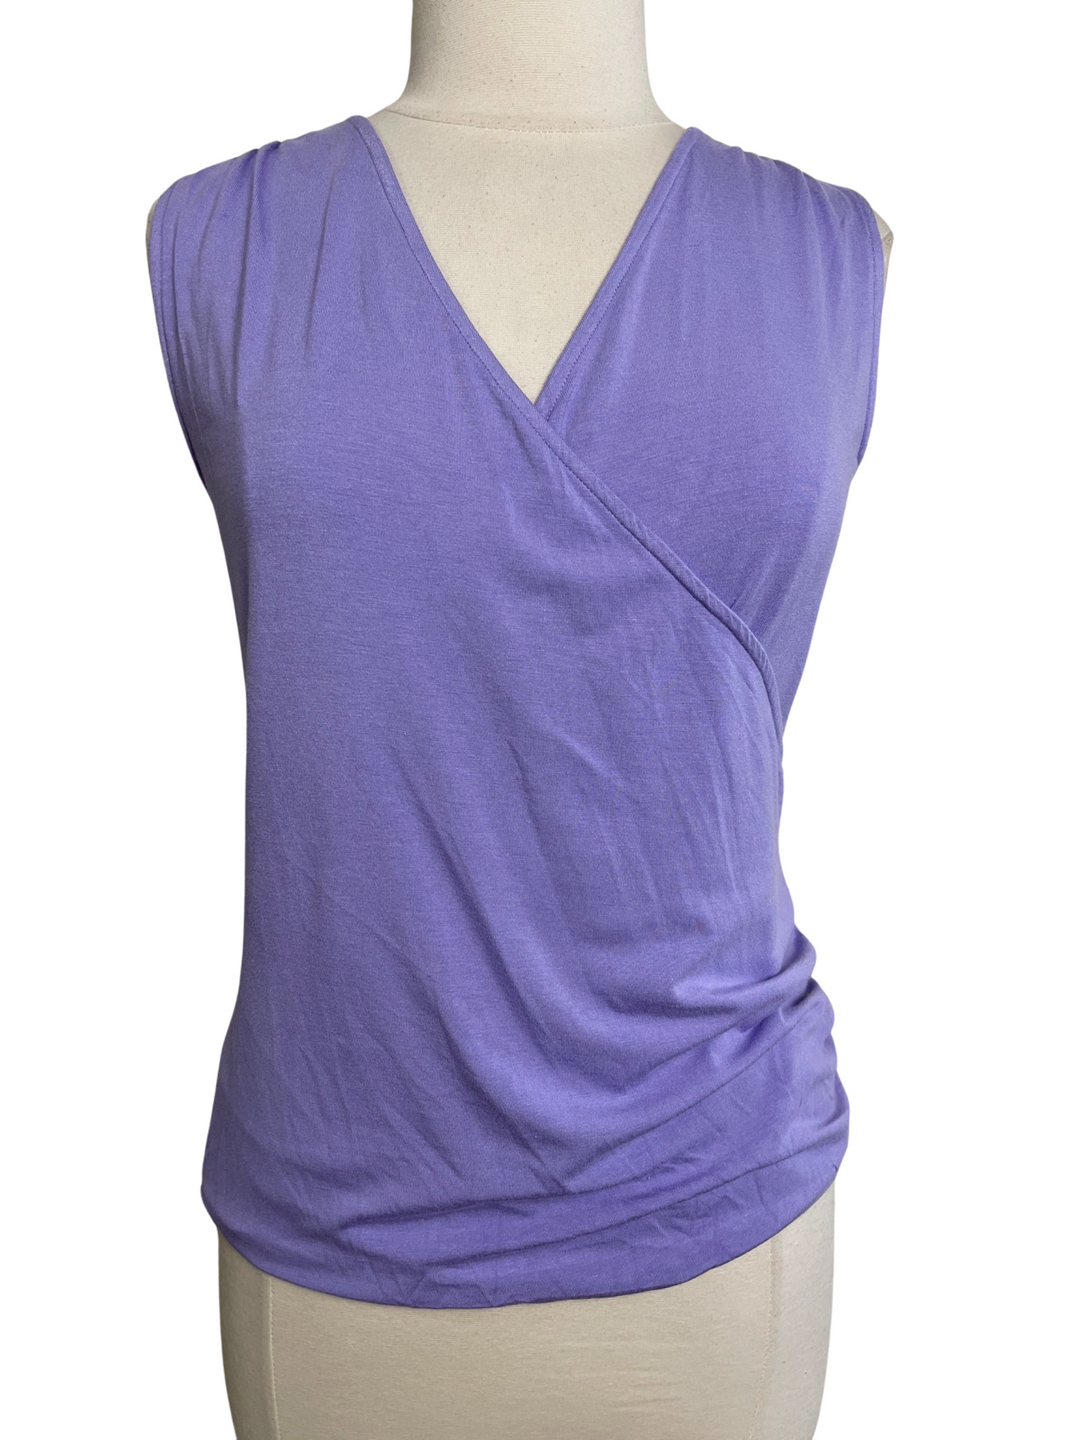 Swing Control Knit Jersey Sleeveless Top - Violet - Small - Skorzie